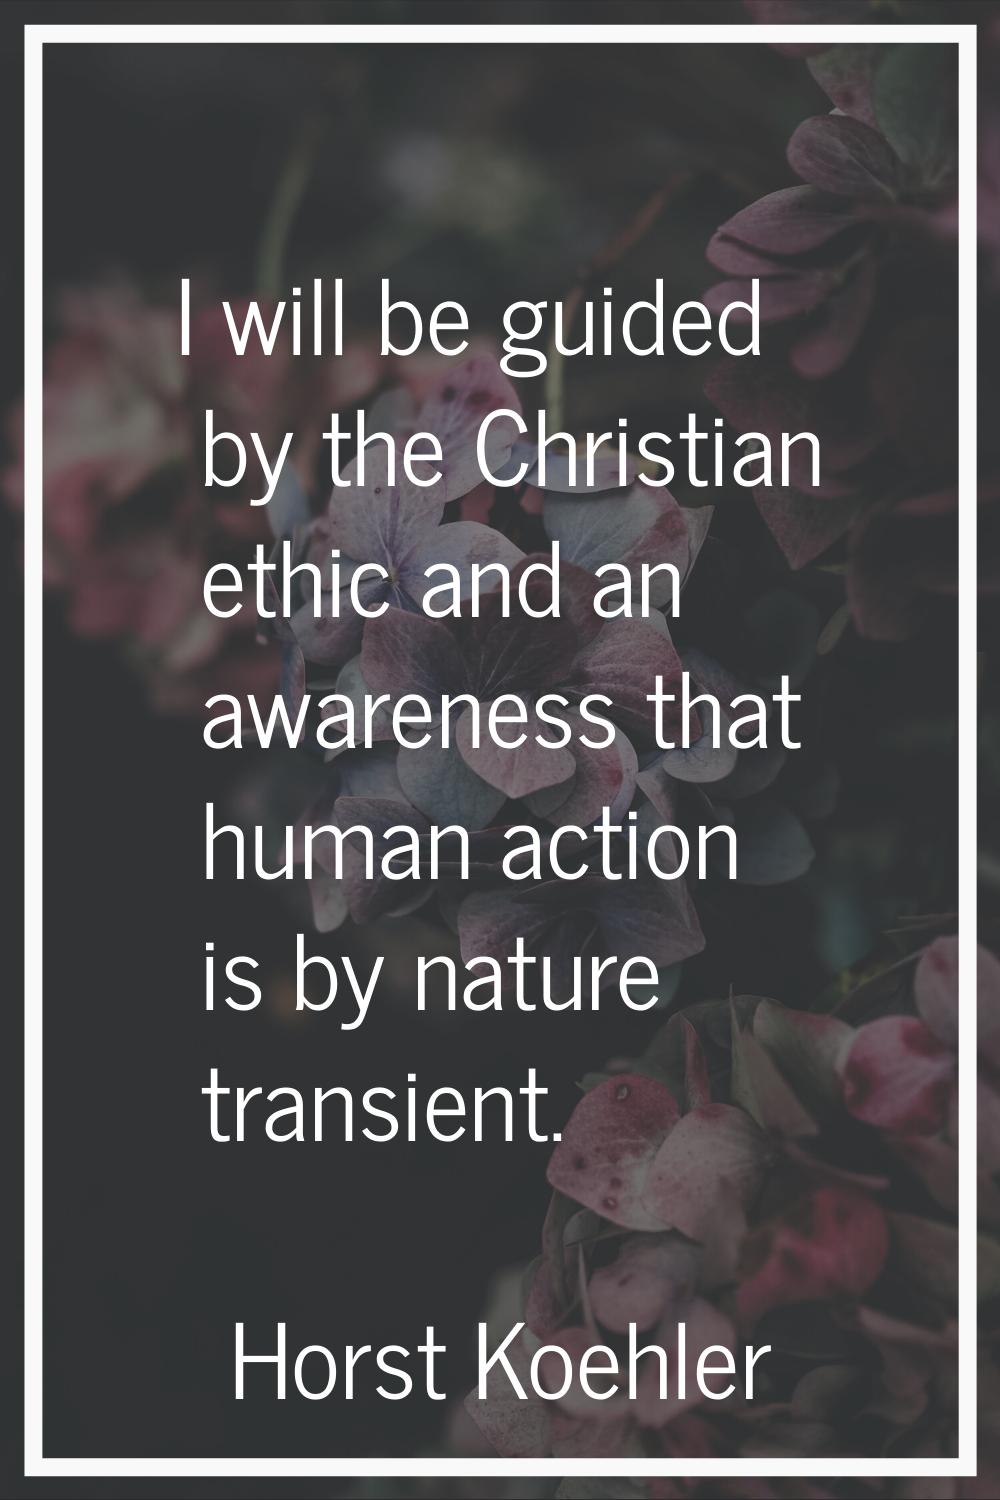 I will be guided by the Christian ethic and an awareness that human action is by nature transient.